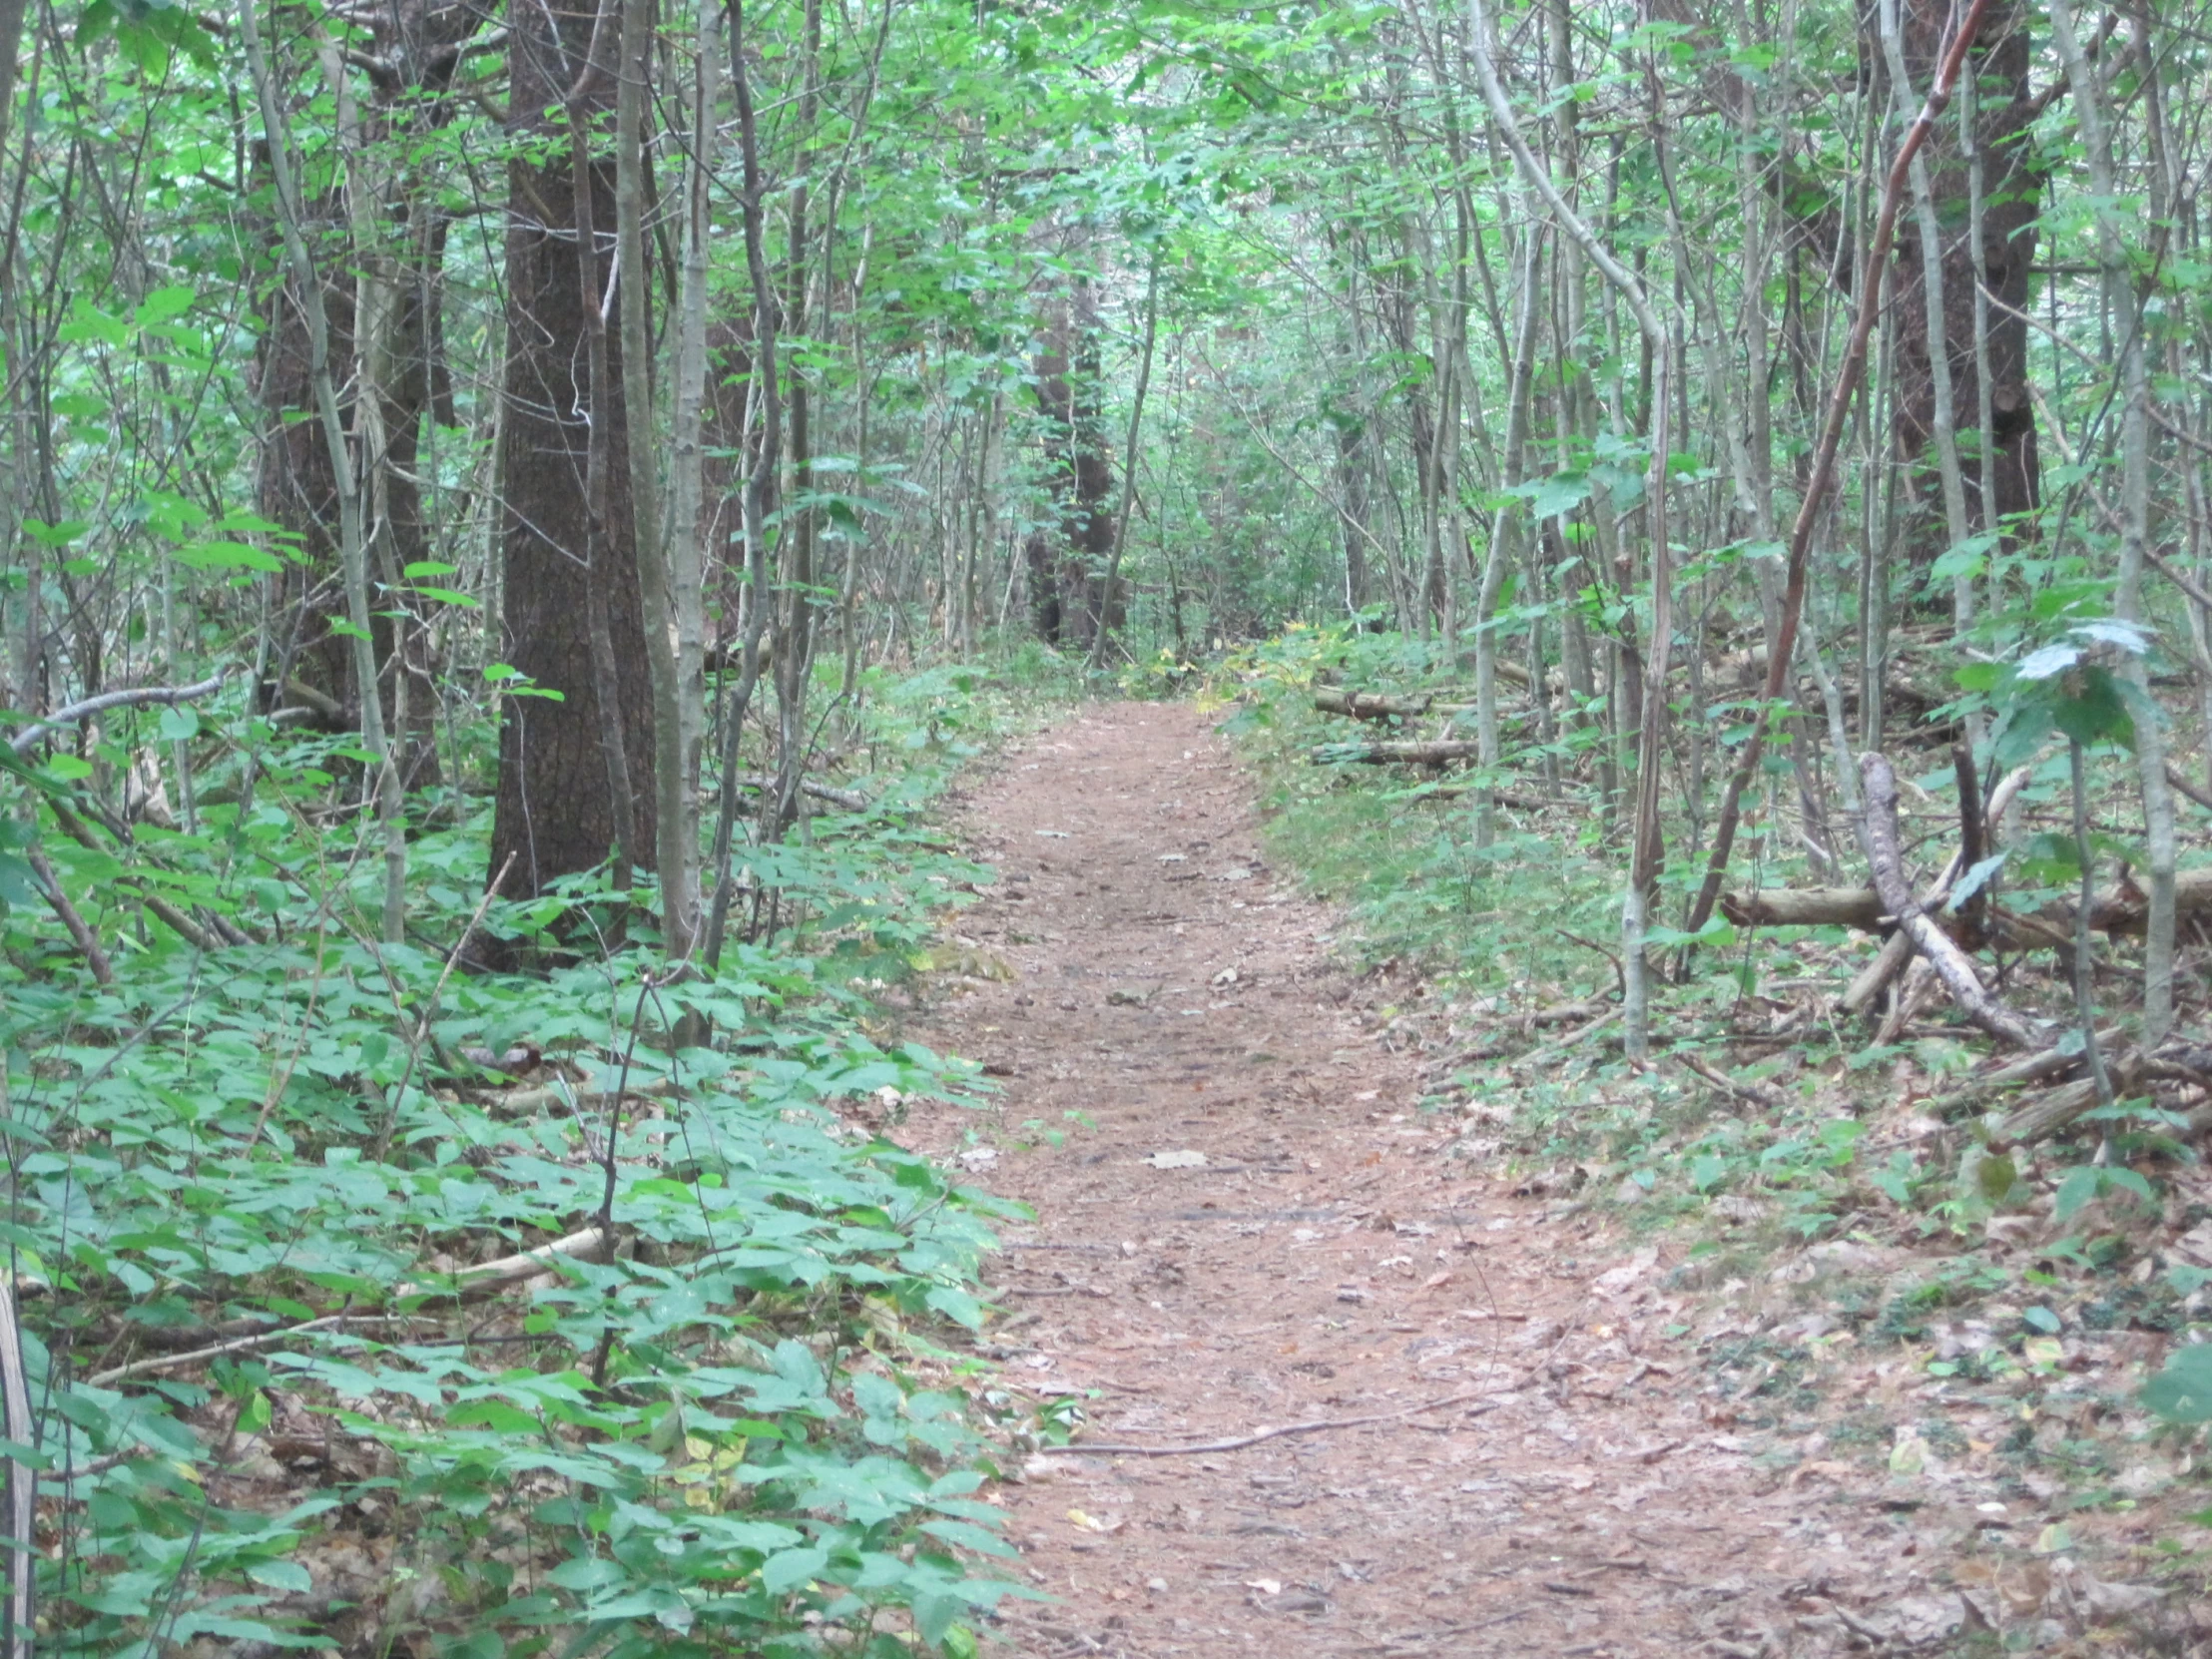 a wooded area with a dirt path in the forest